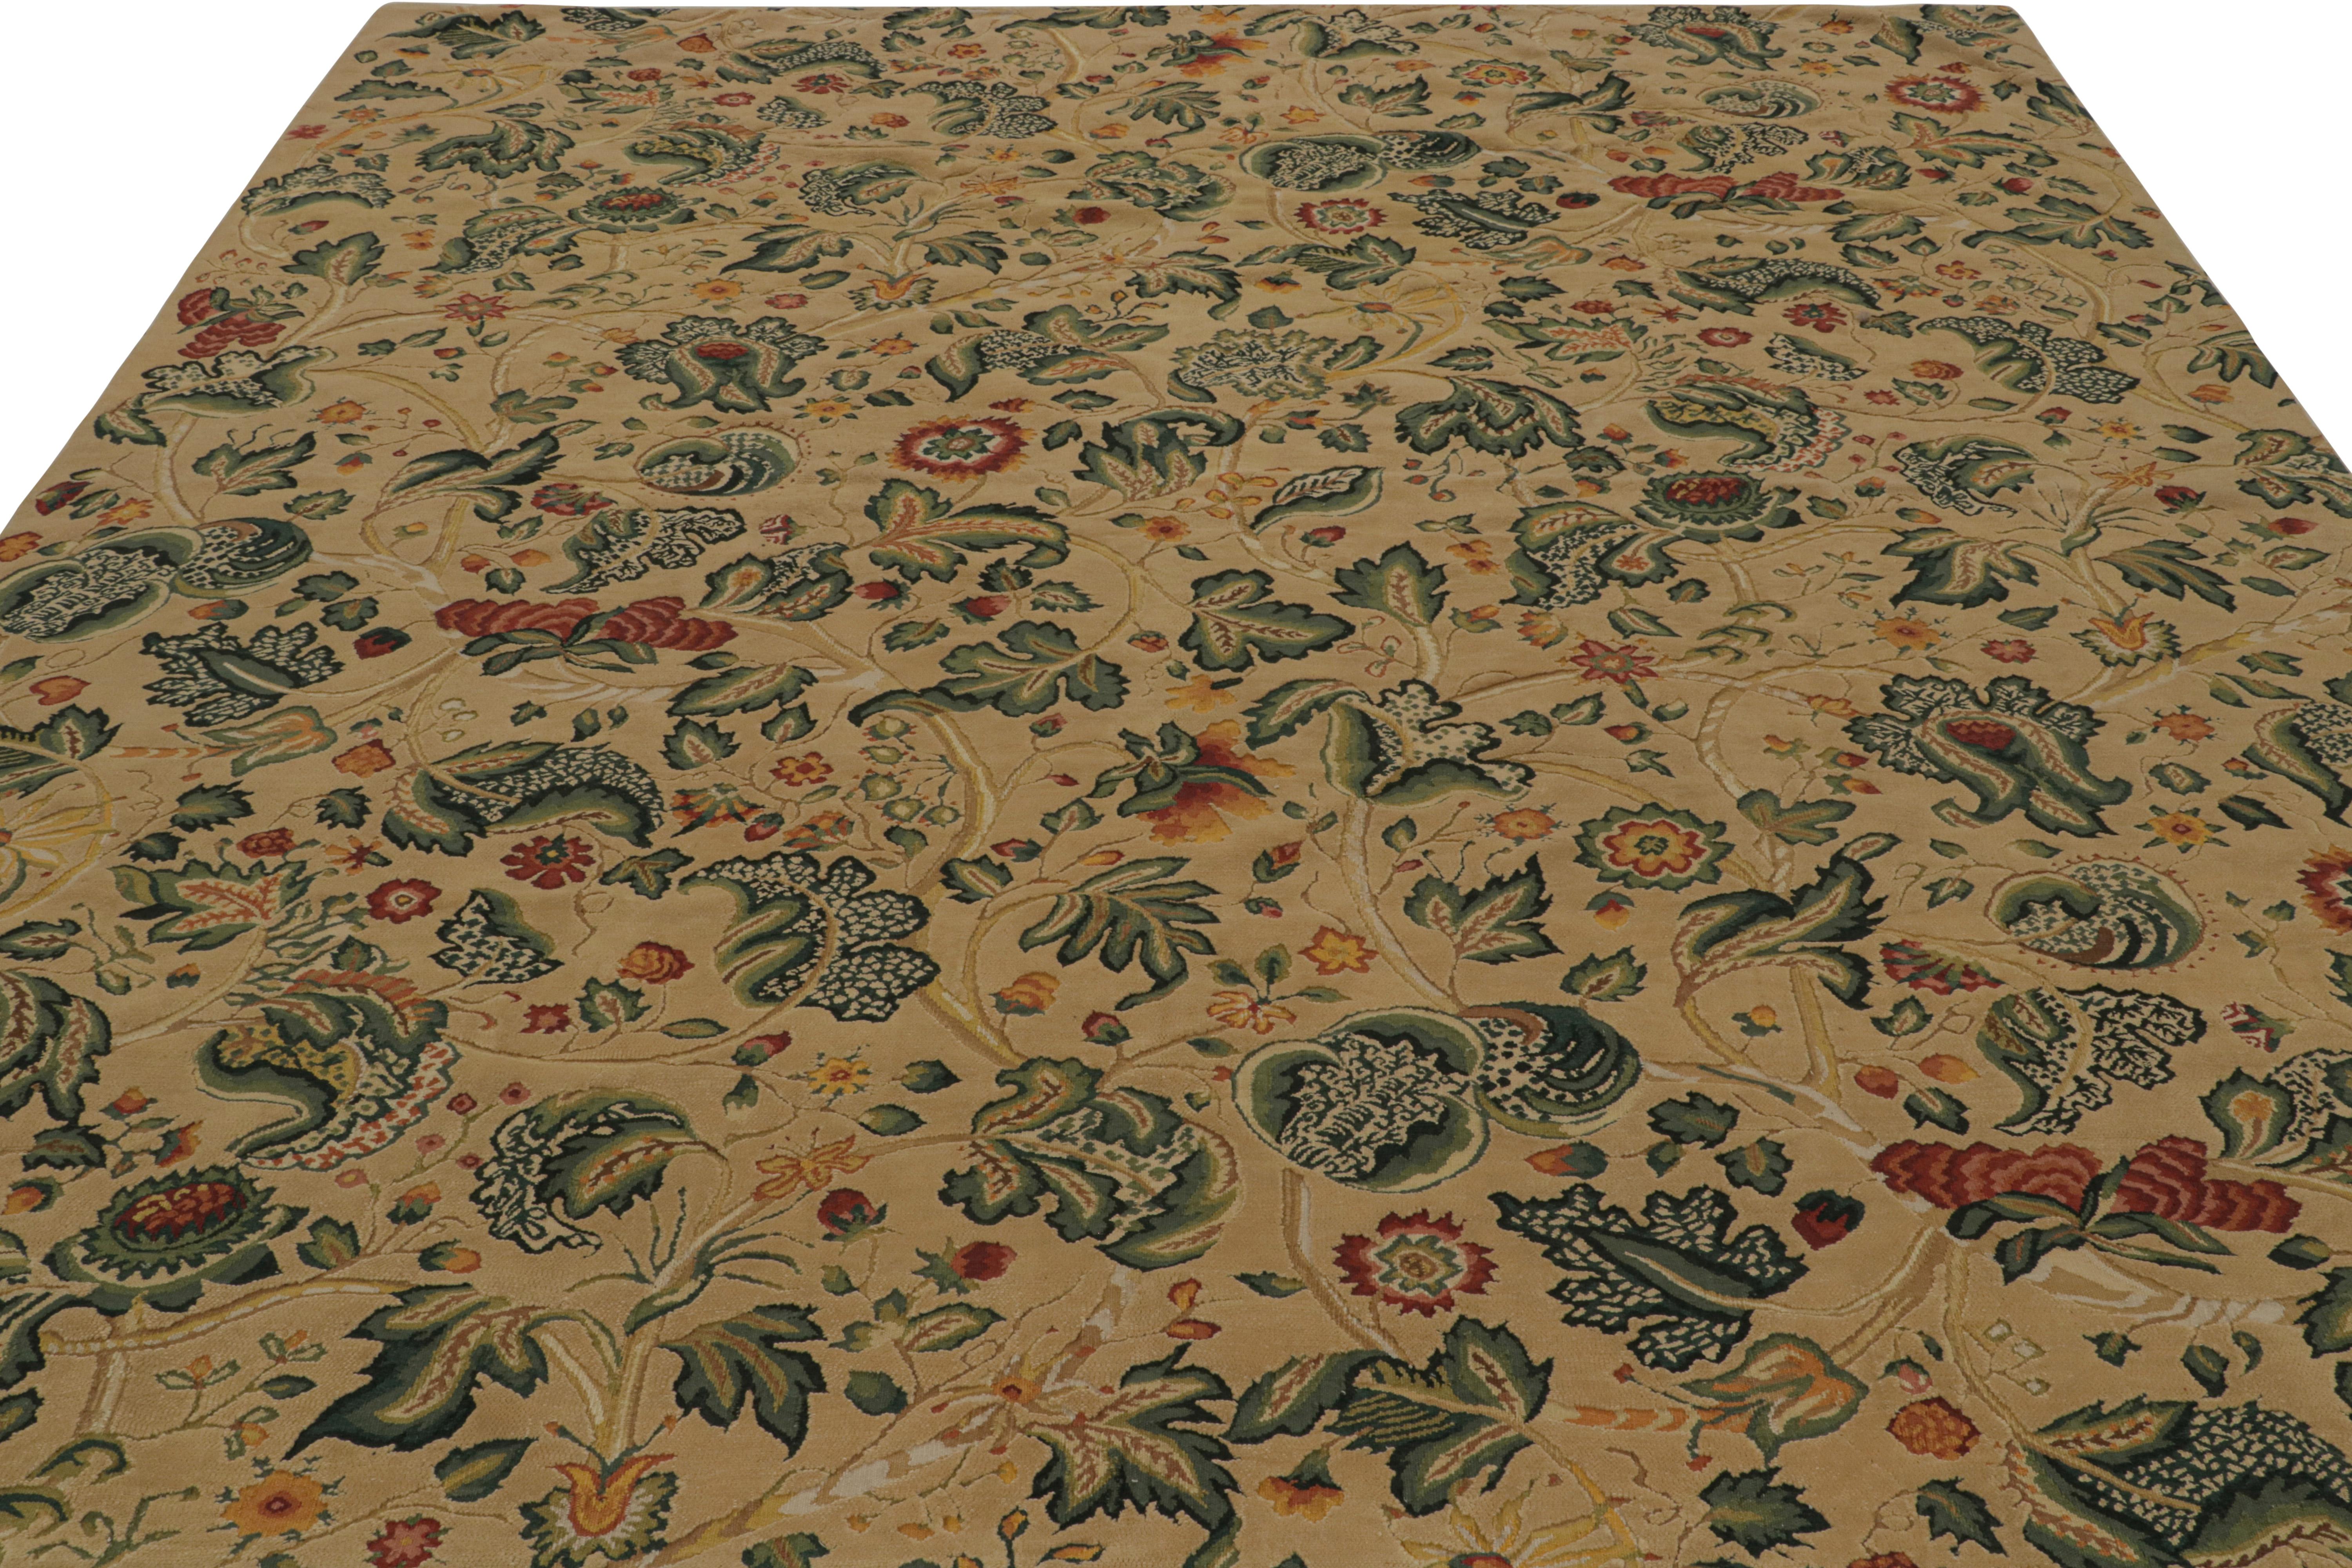 Modern Rug & Kilim’s European Style Flatweave Rug in Cream with Floral Patterns ‘Tudor’ For Sale